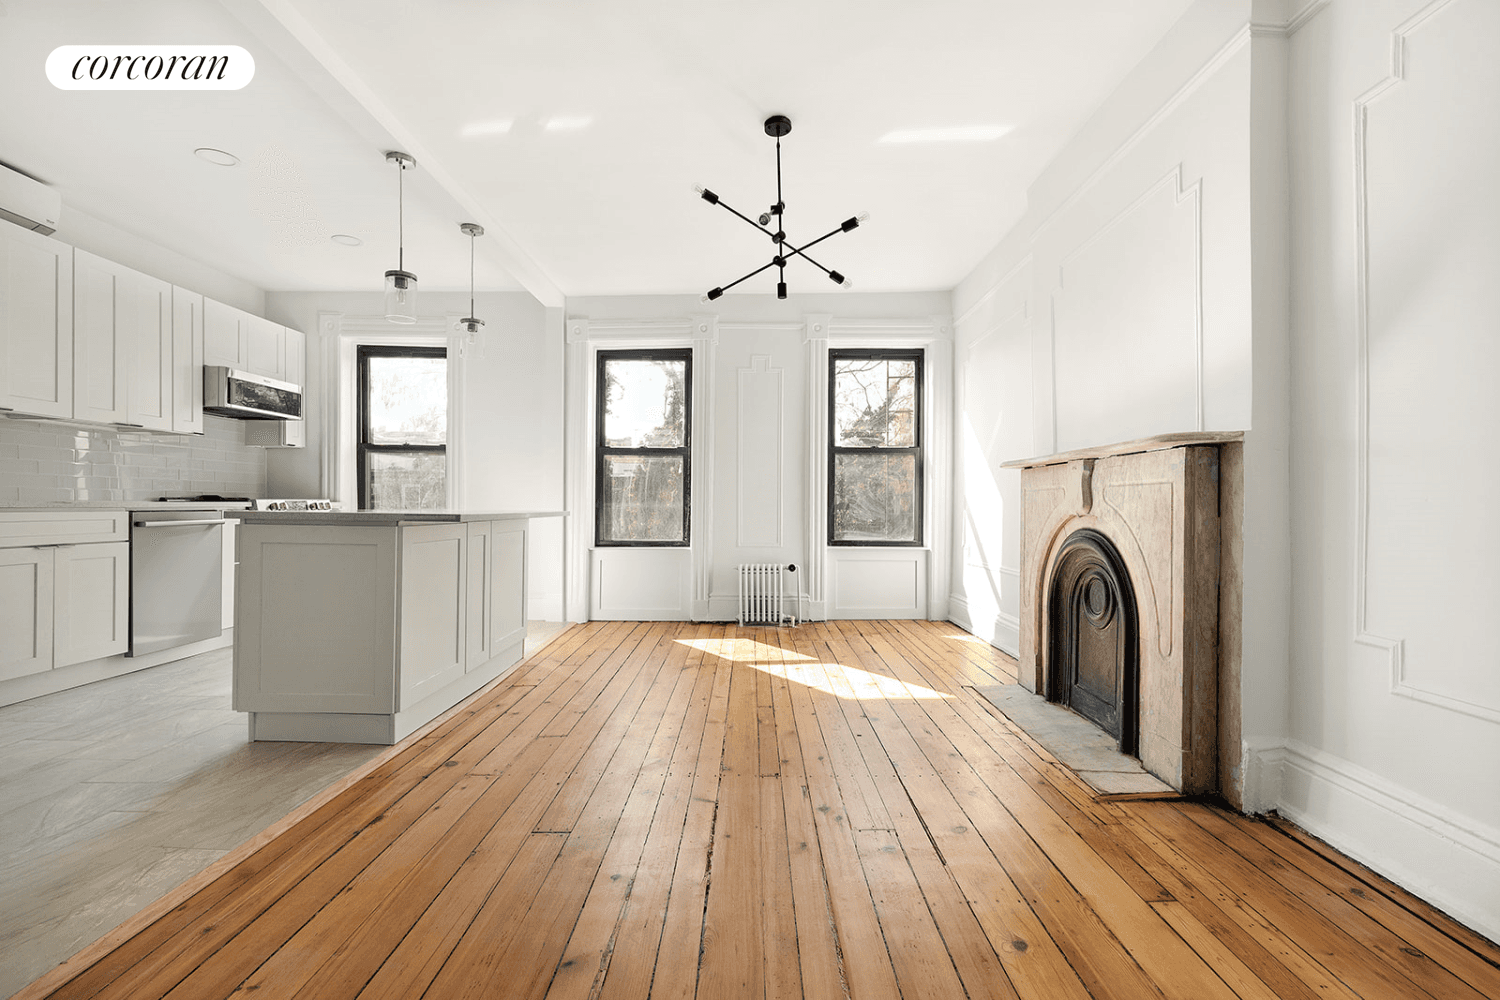 Situated on a highly coveted Park Slope block, this newly renovated apartment blends gorgeous historic details with modern conveniences and high end finishes.